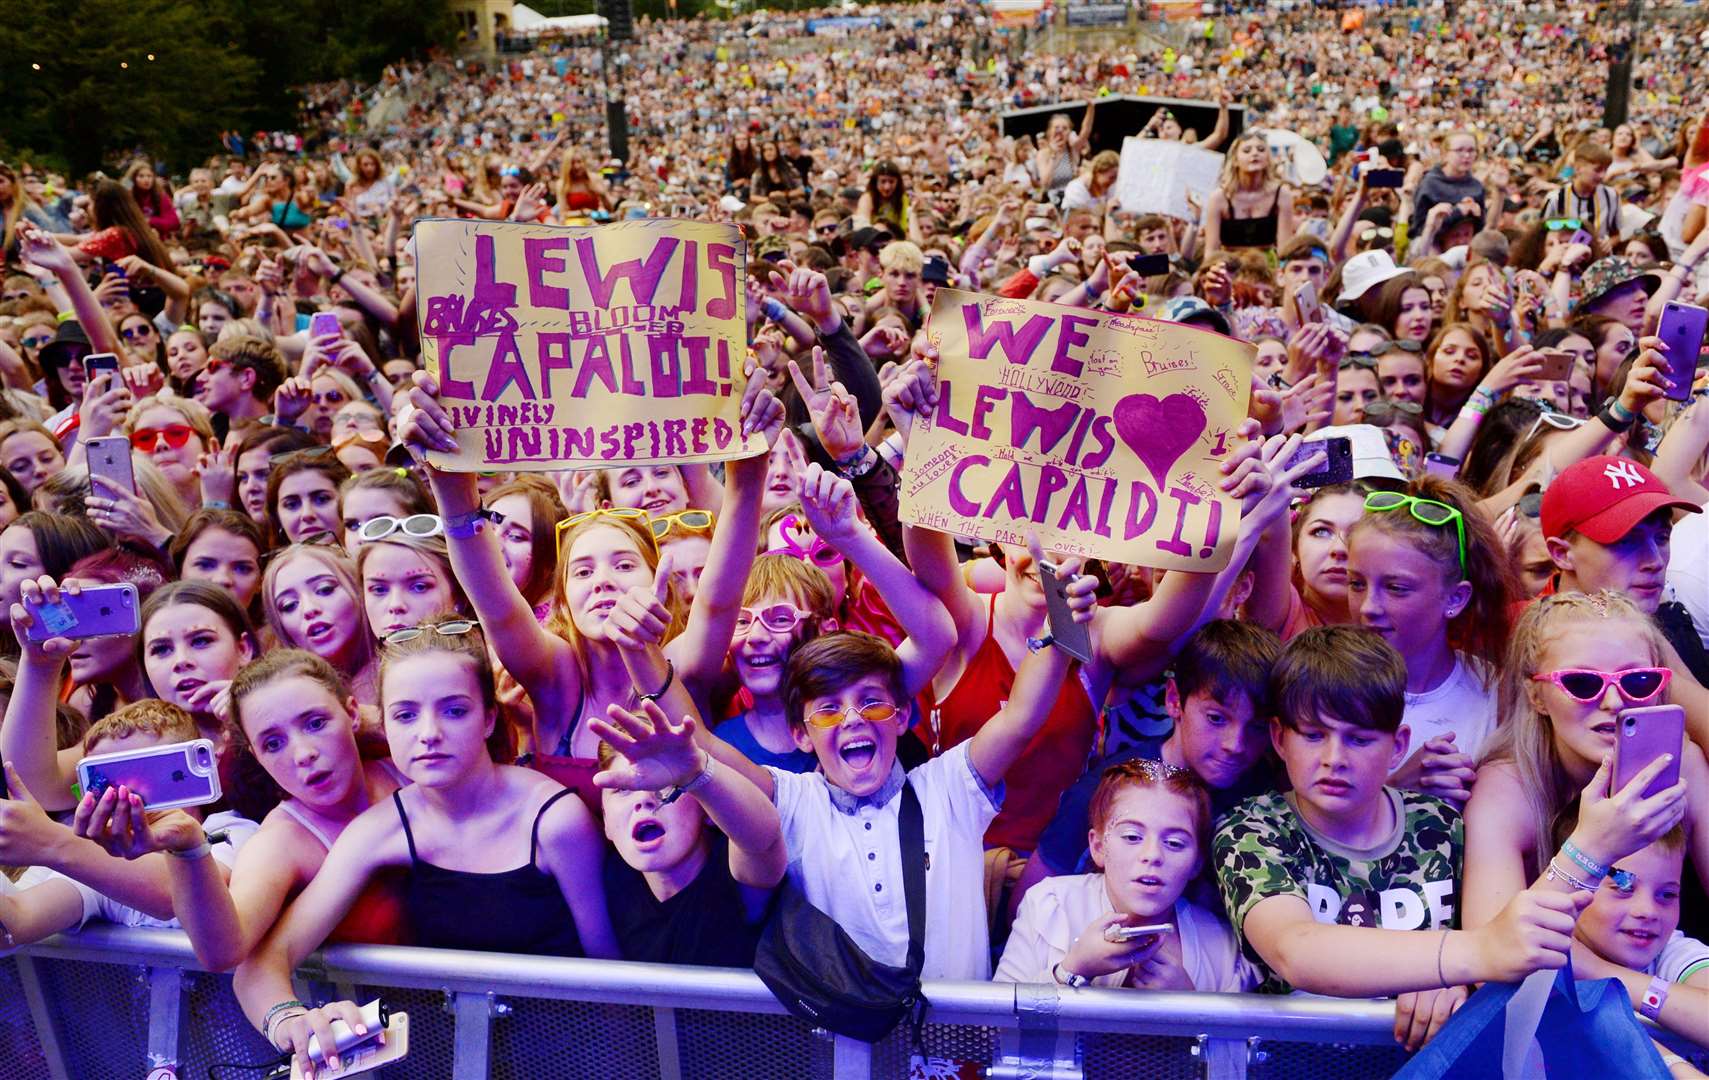 Crowds go wild for Lewis Capaldi. Picture: Gary Anthony. Image No.044555.